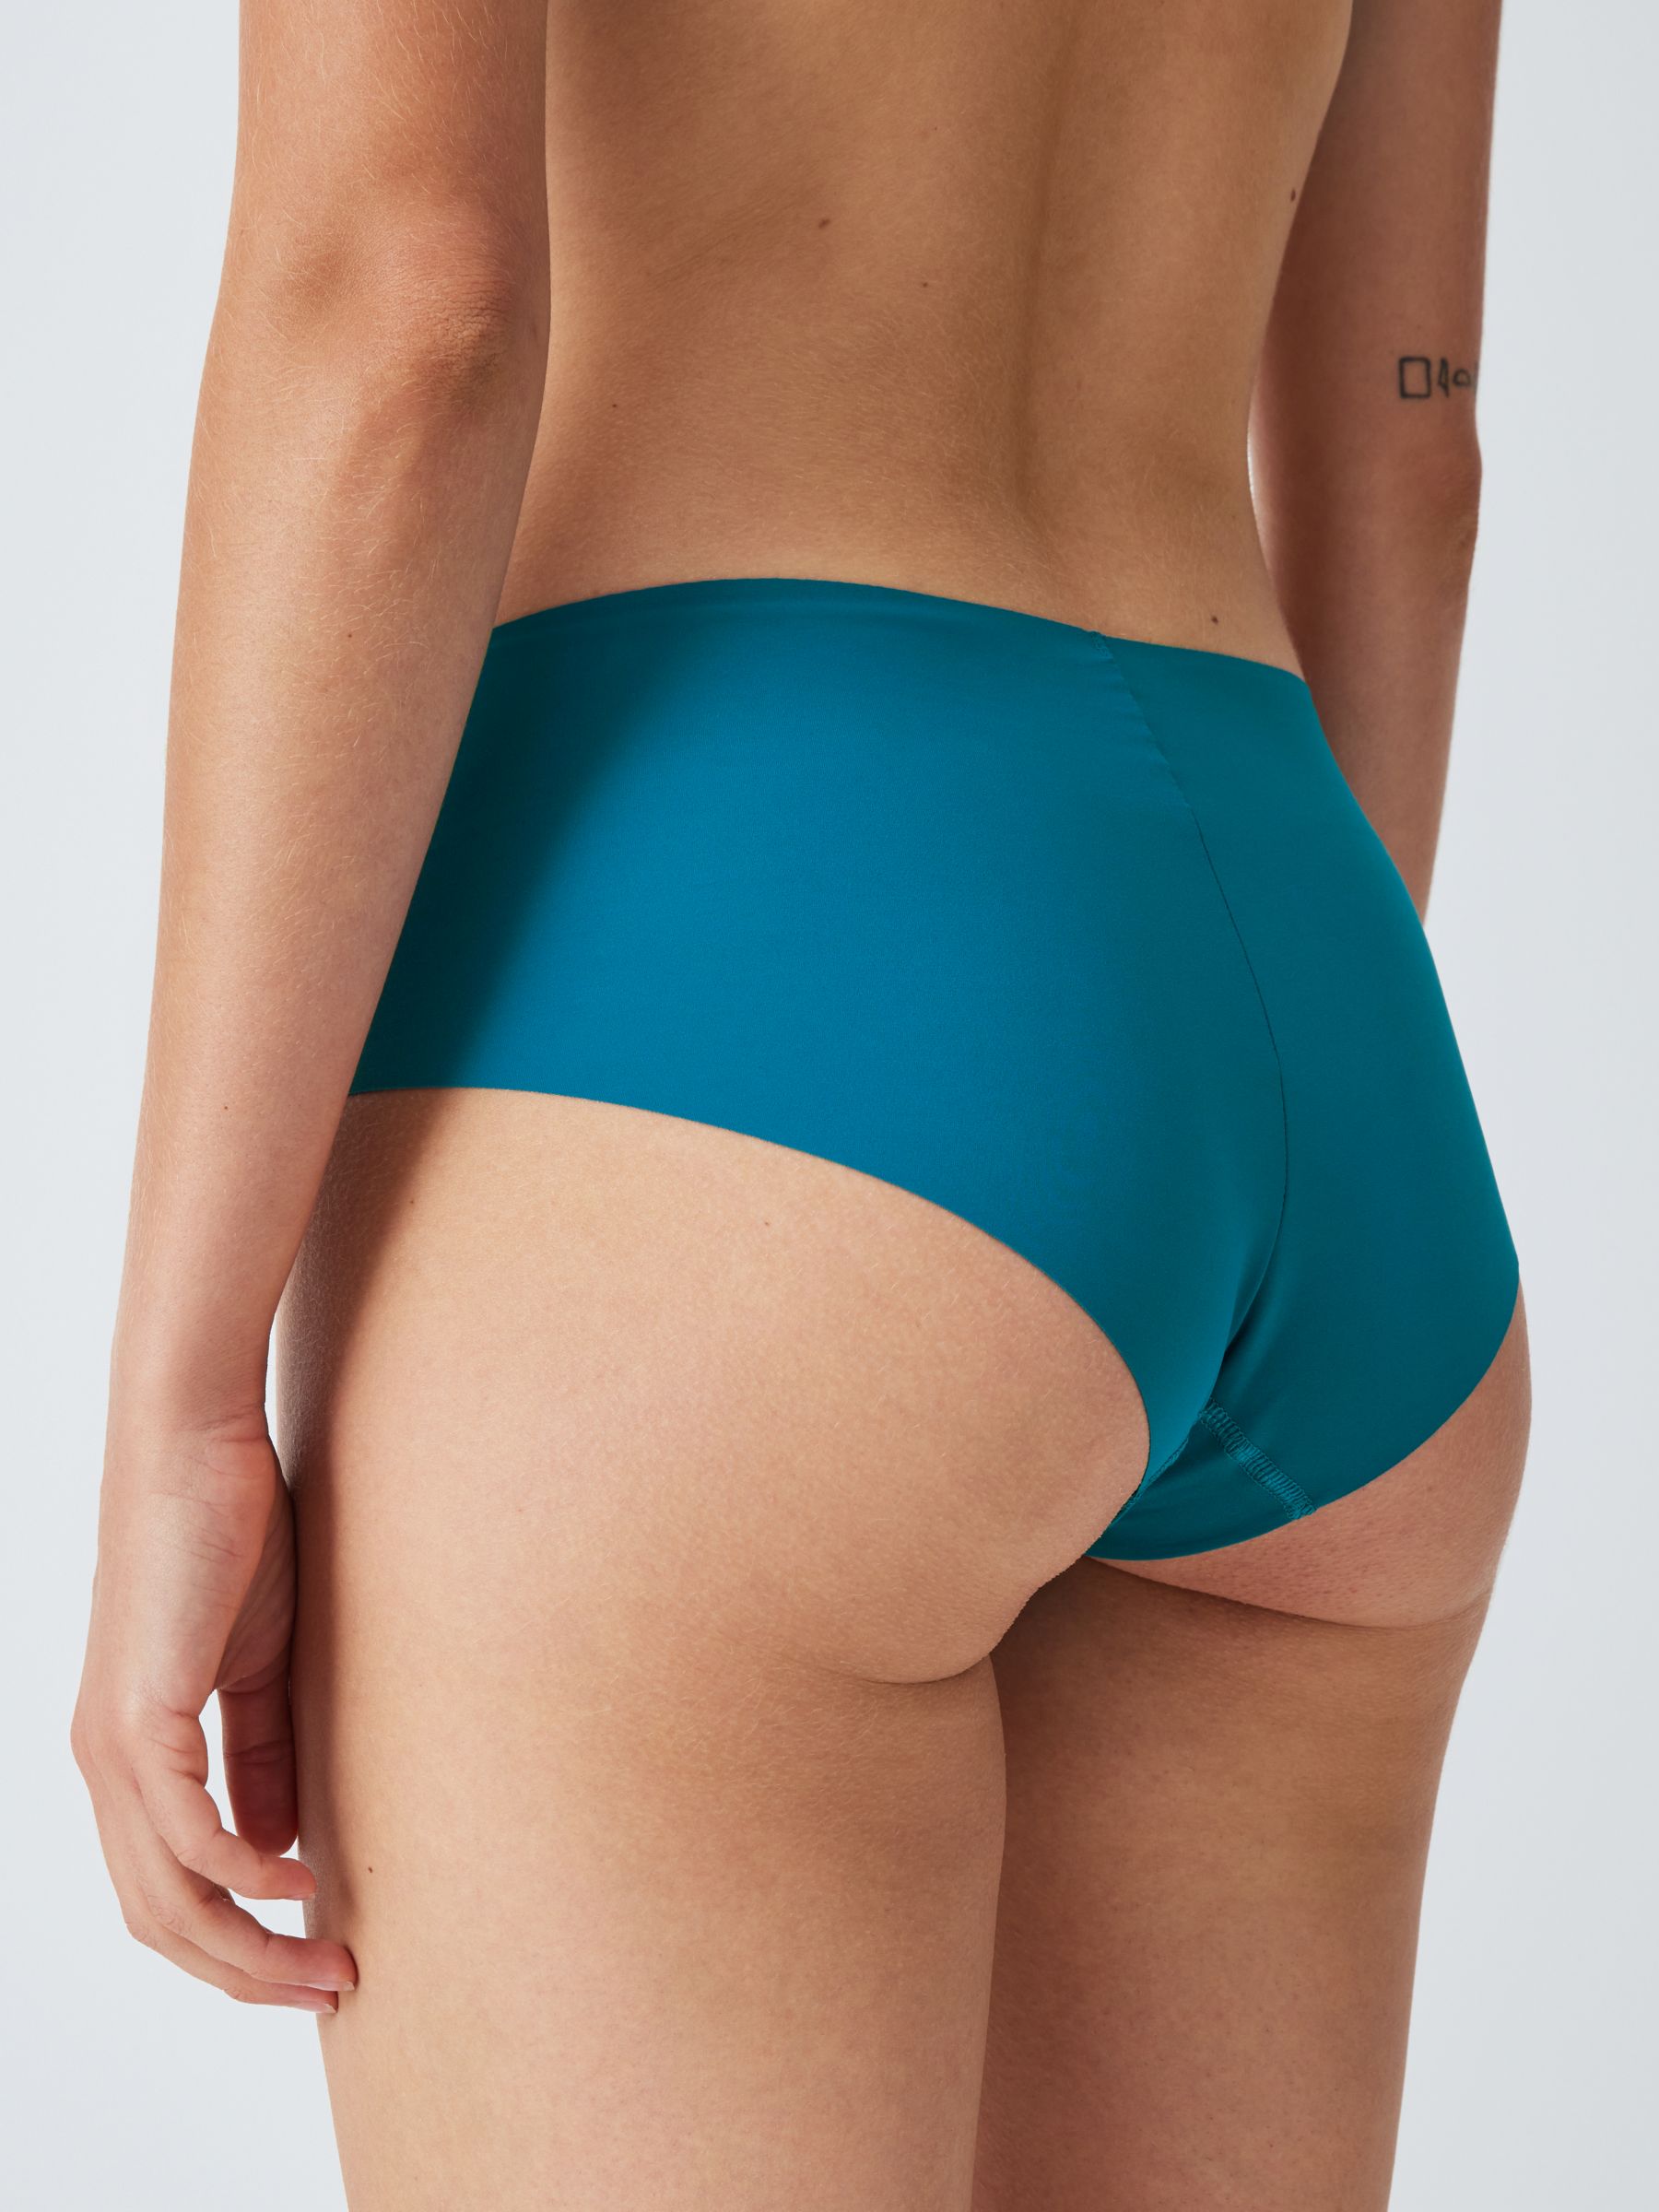 Buy John Lewis ANYDAY No VPL Short Knickers, Pack of 3 Online at johnlewis.com